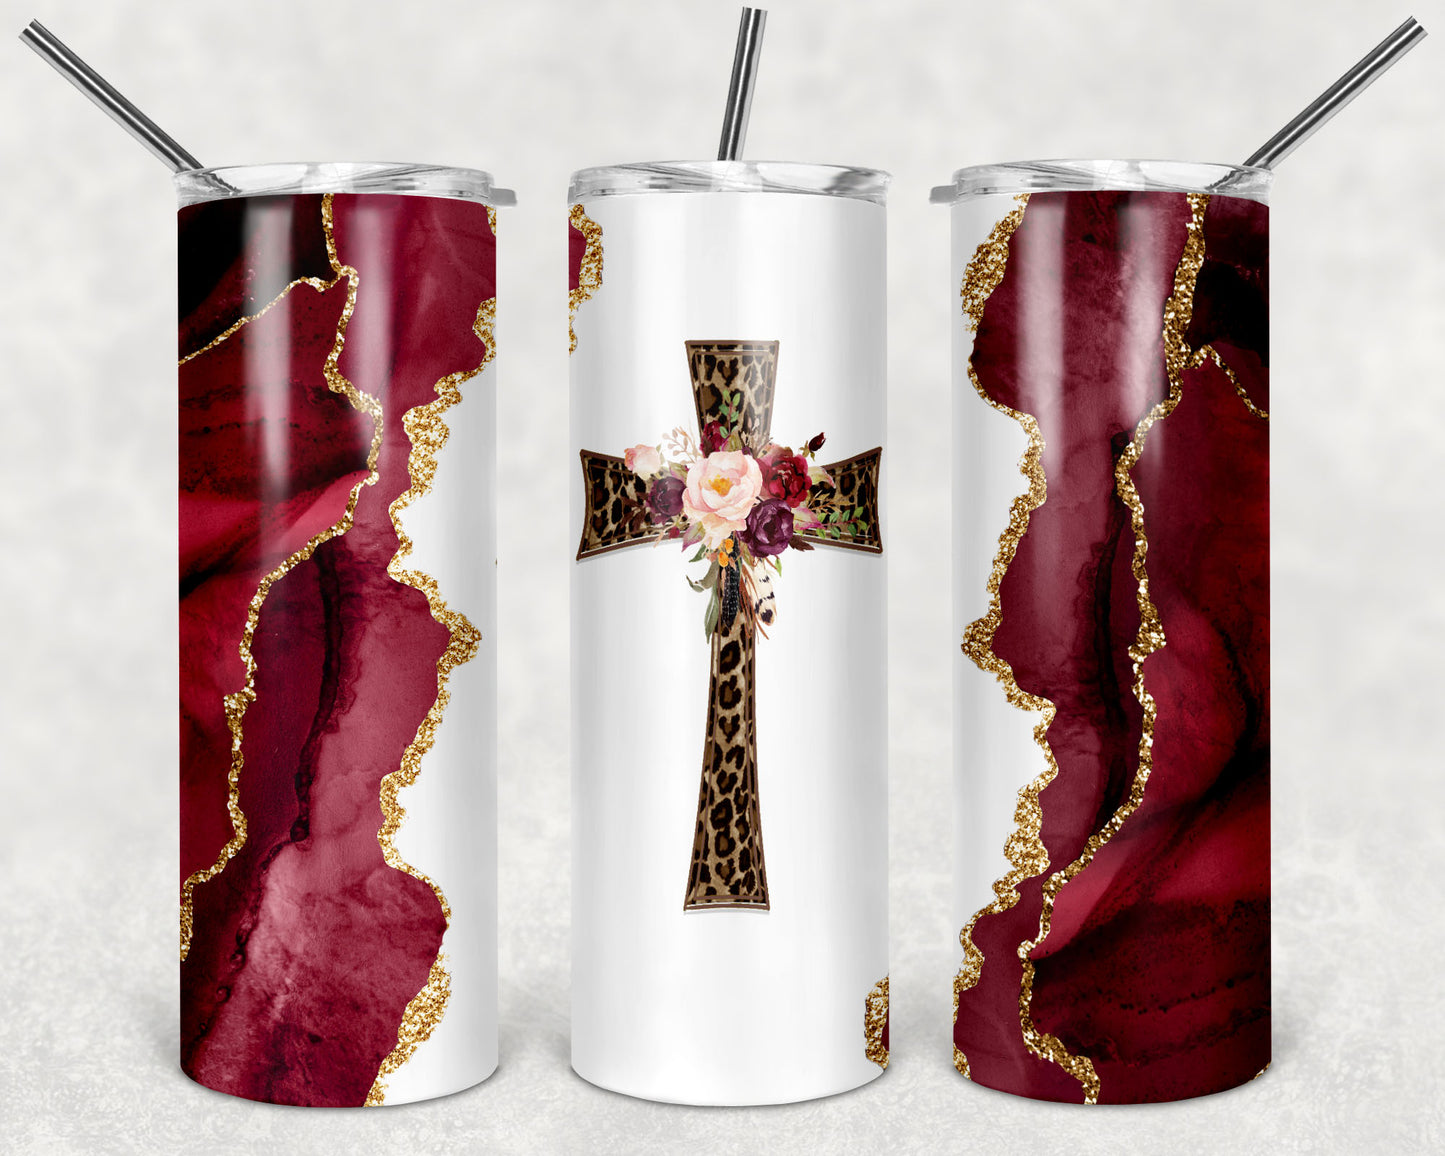 The "Cross" 20 oz Stainless Steel Double Wall Tumbler